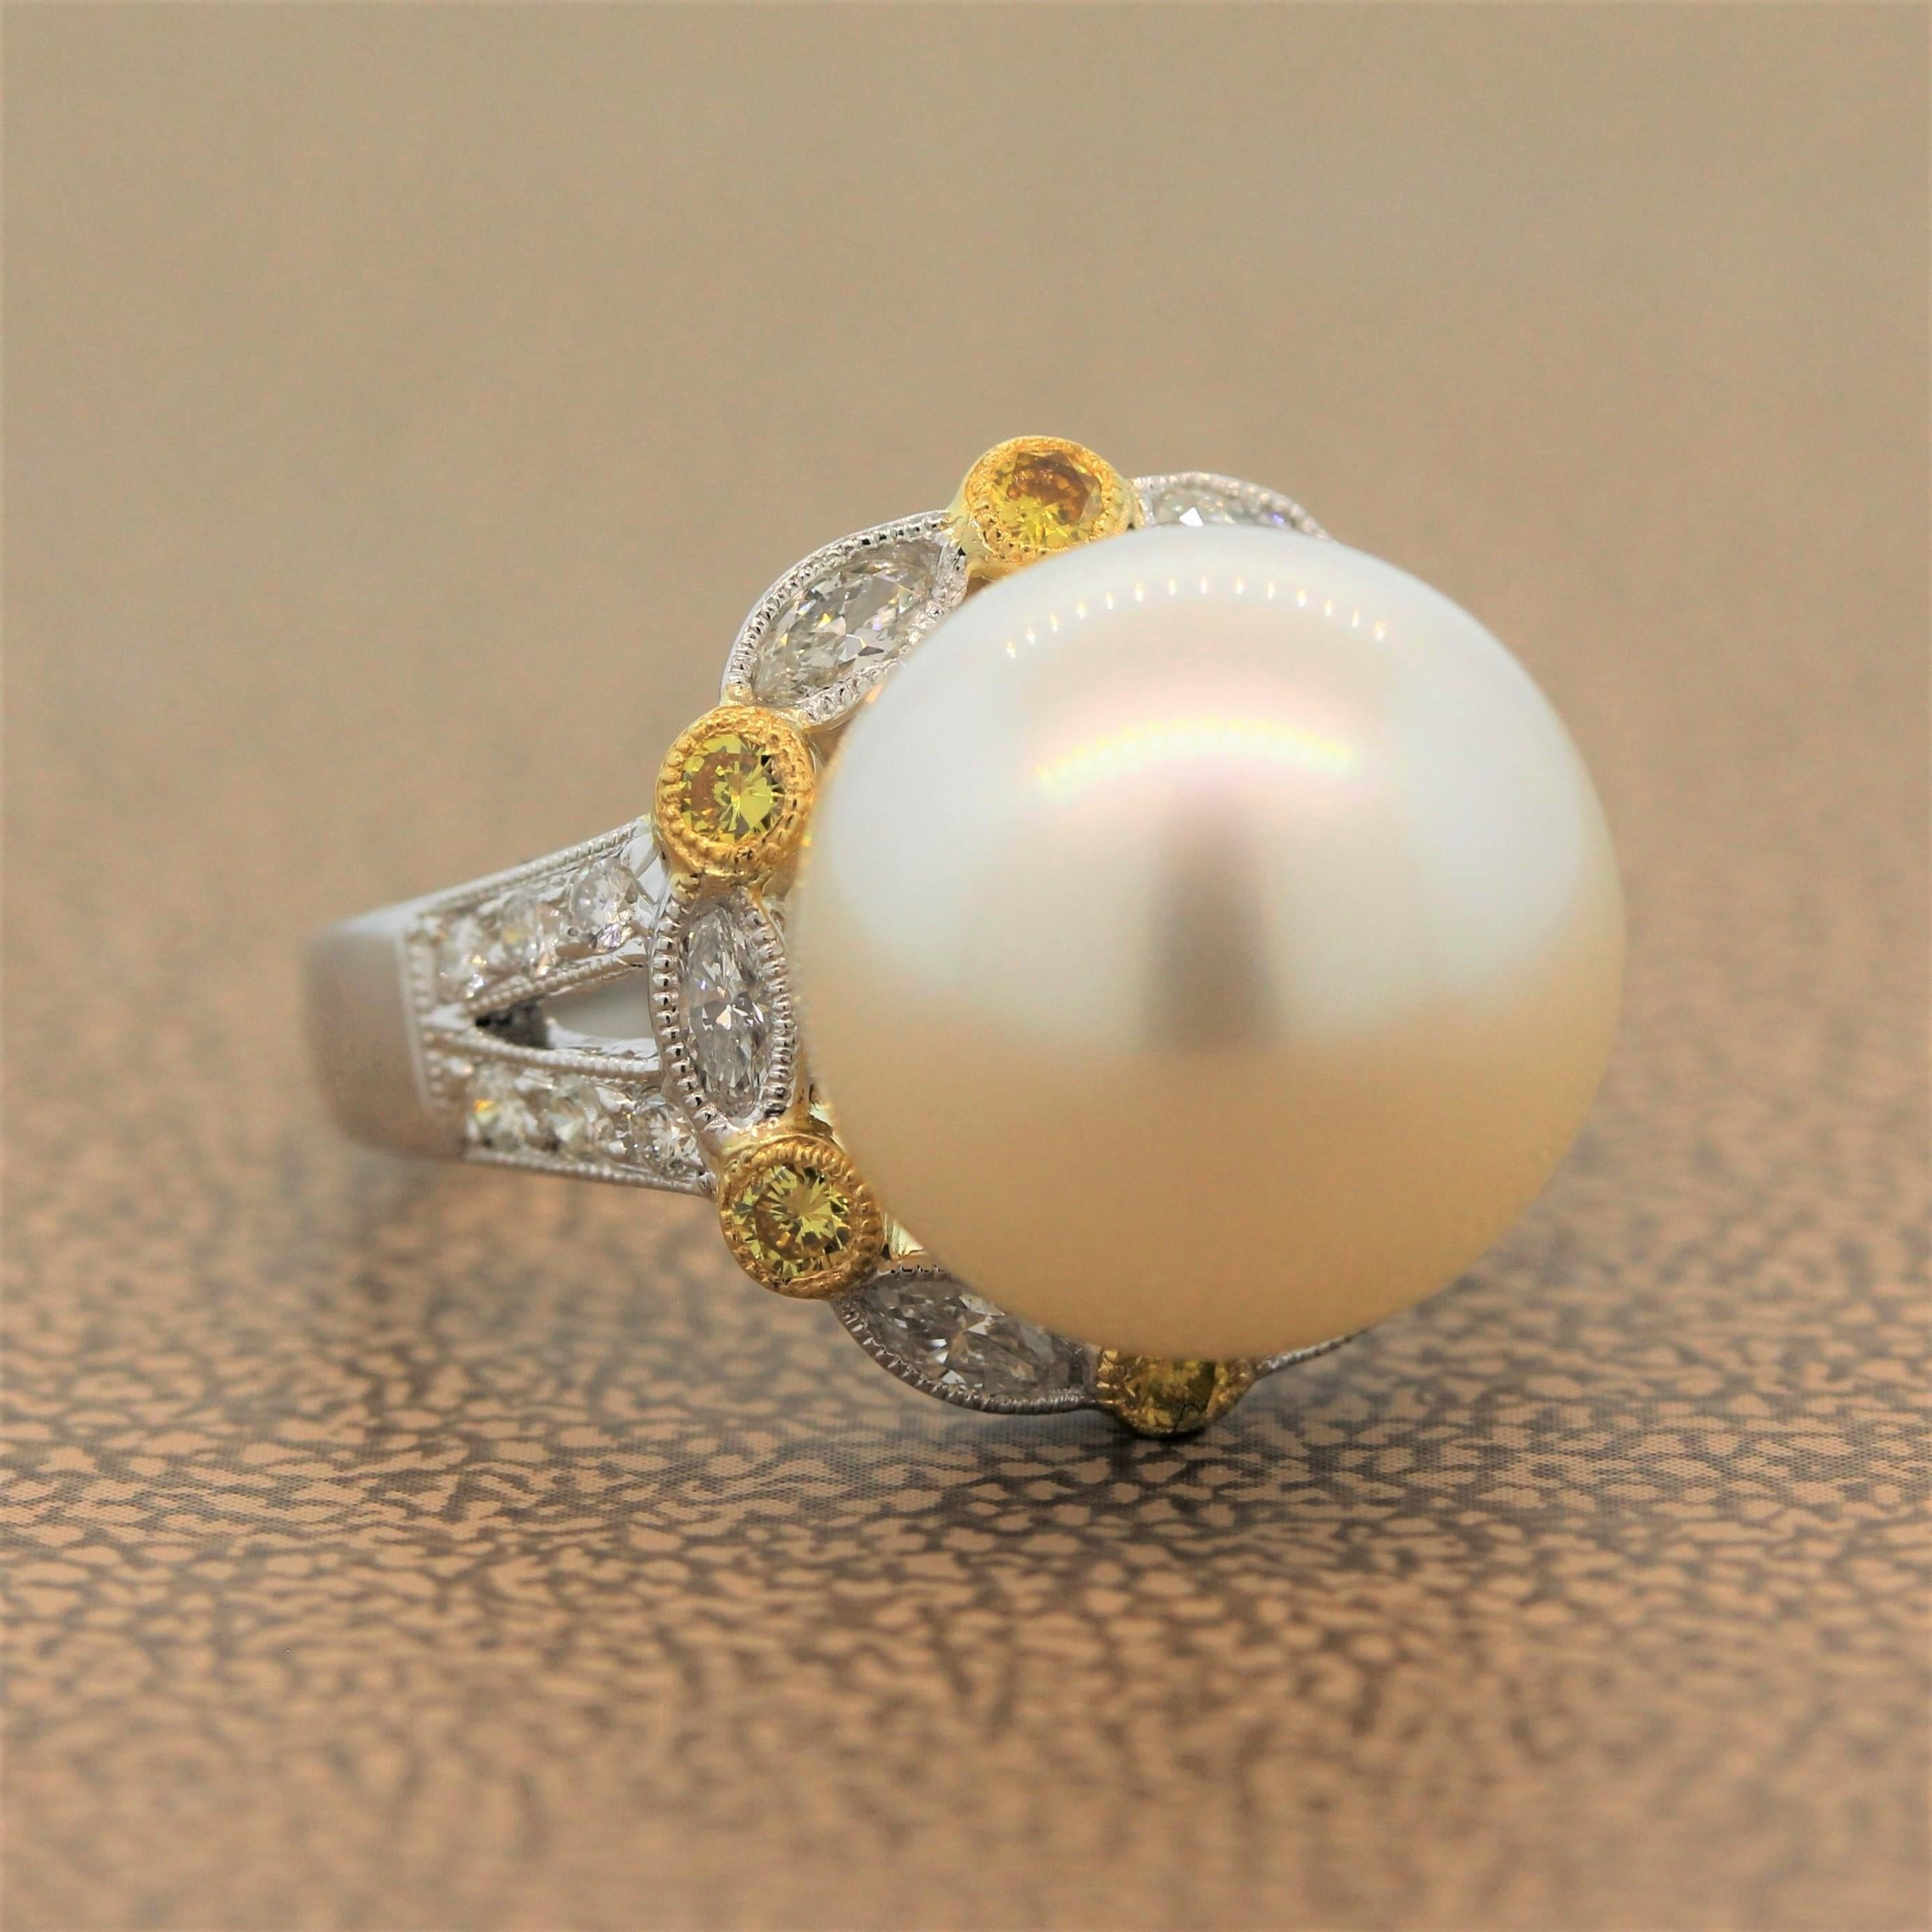 A sweet ring featuring a blemish free South Sea pearl accented by a halo of 0.75 carats of marquise cut diamonds set in platinum alternating with round cut fancy yellow round cut diamonds set in 18K yellow gold. The split shank and the milgrain